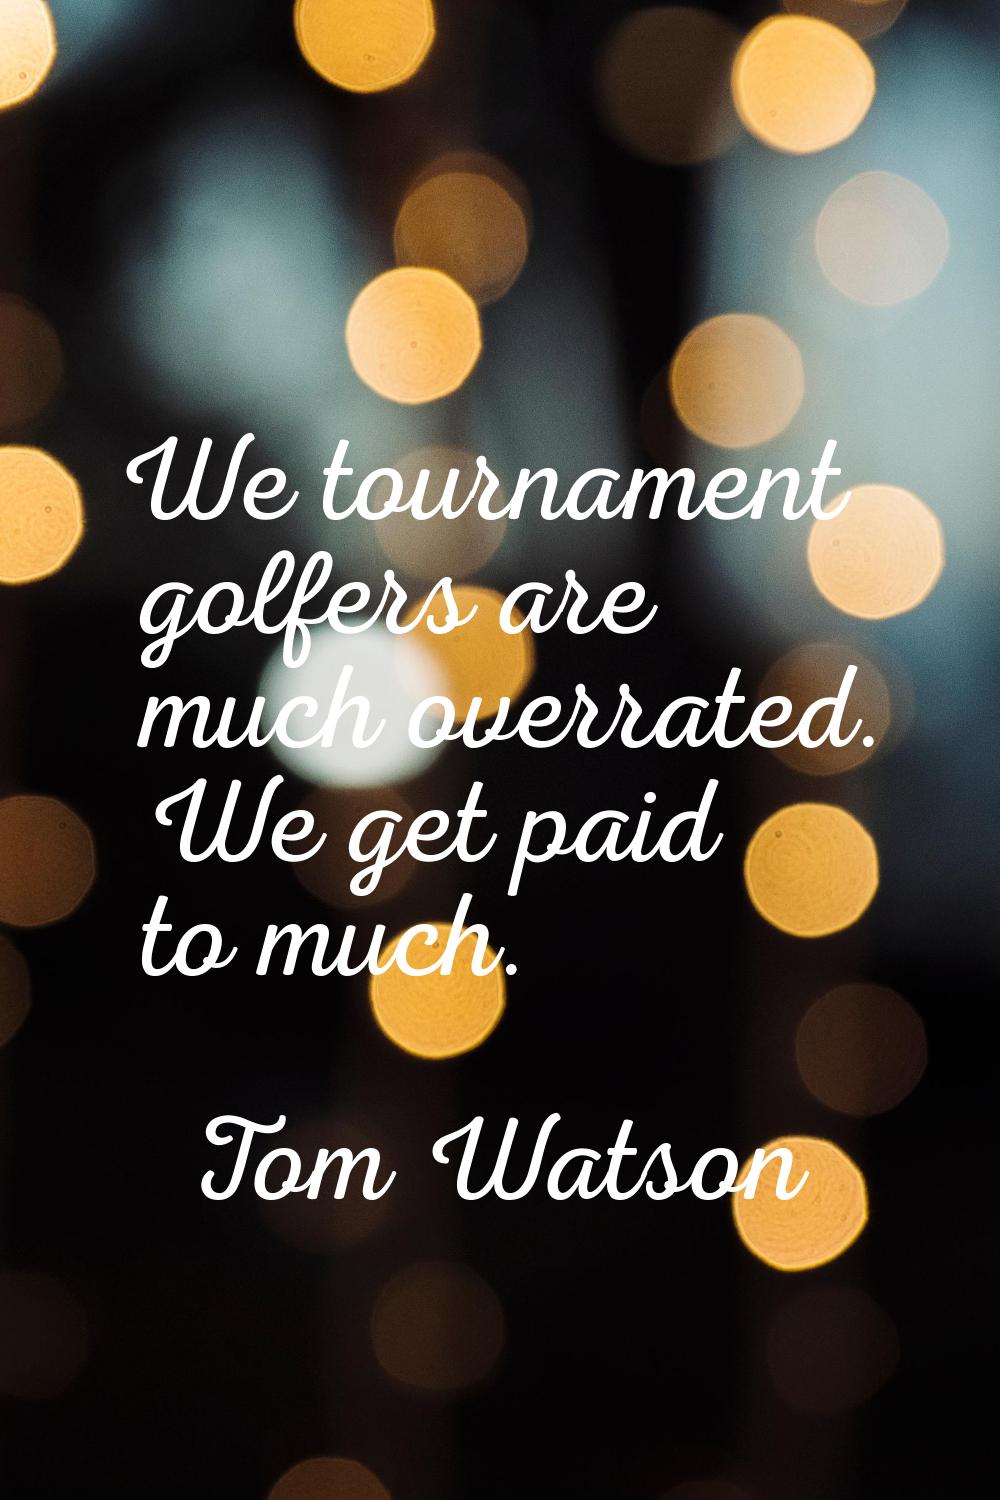 We tournament golfers are much overrated. We get paid to much.